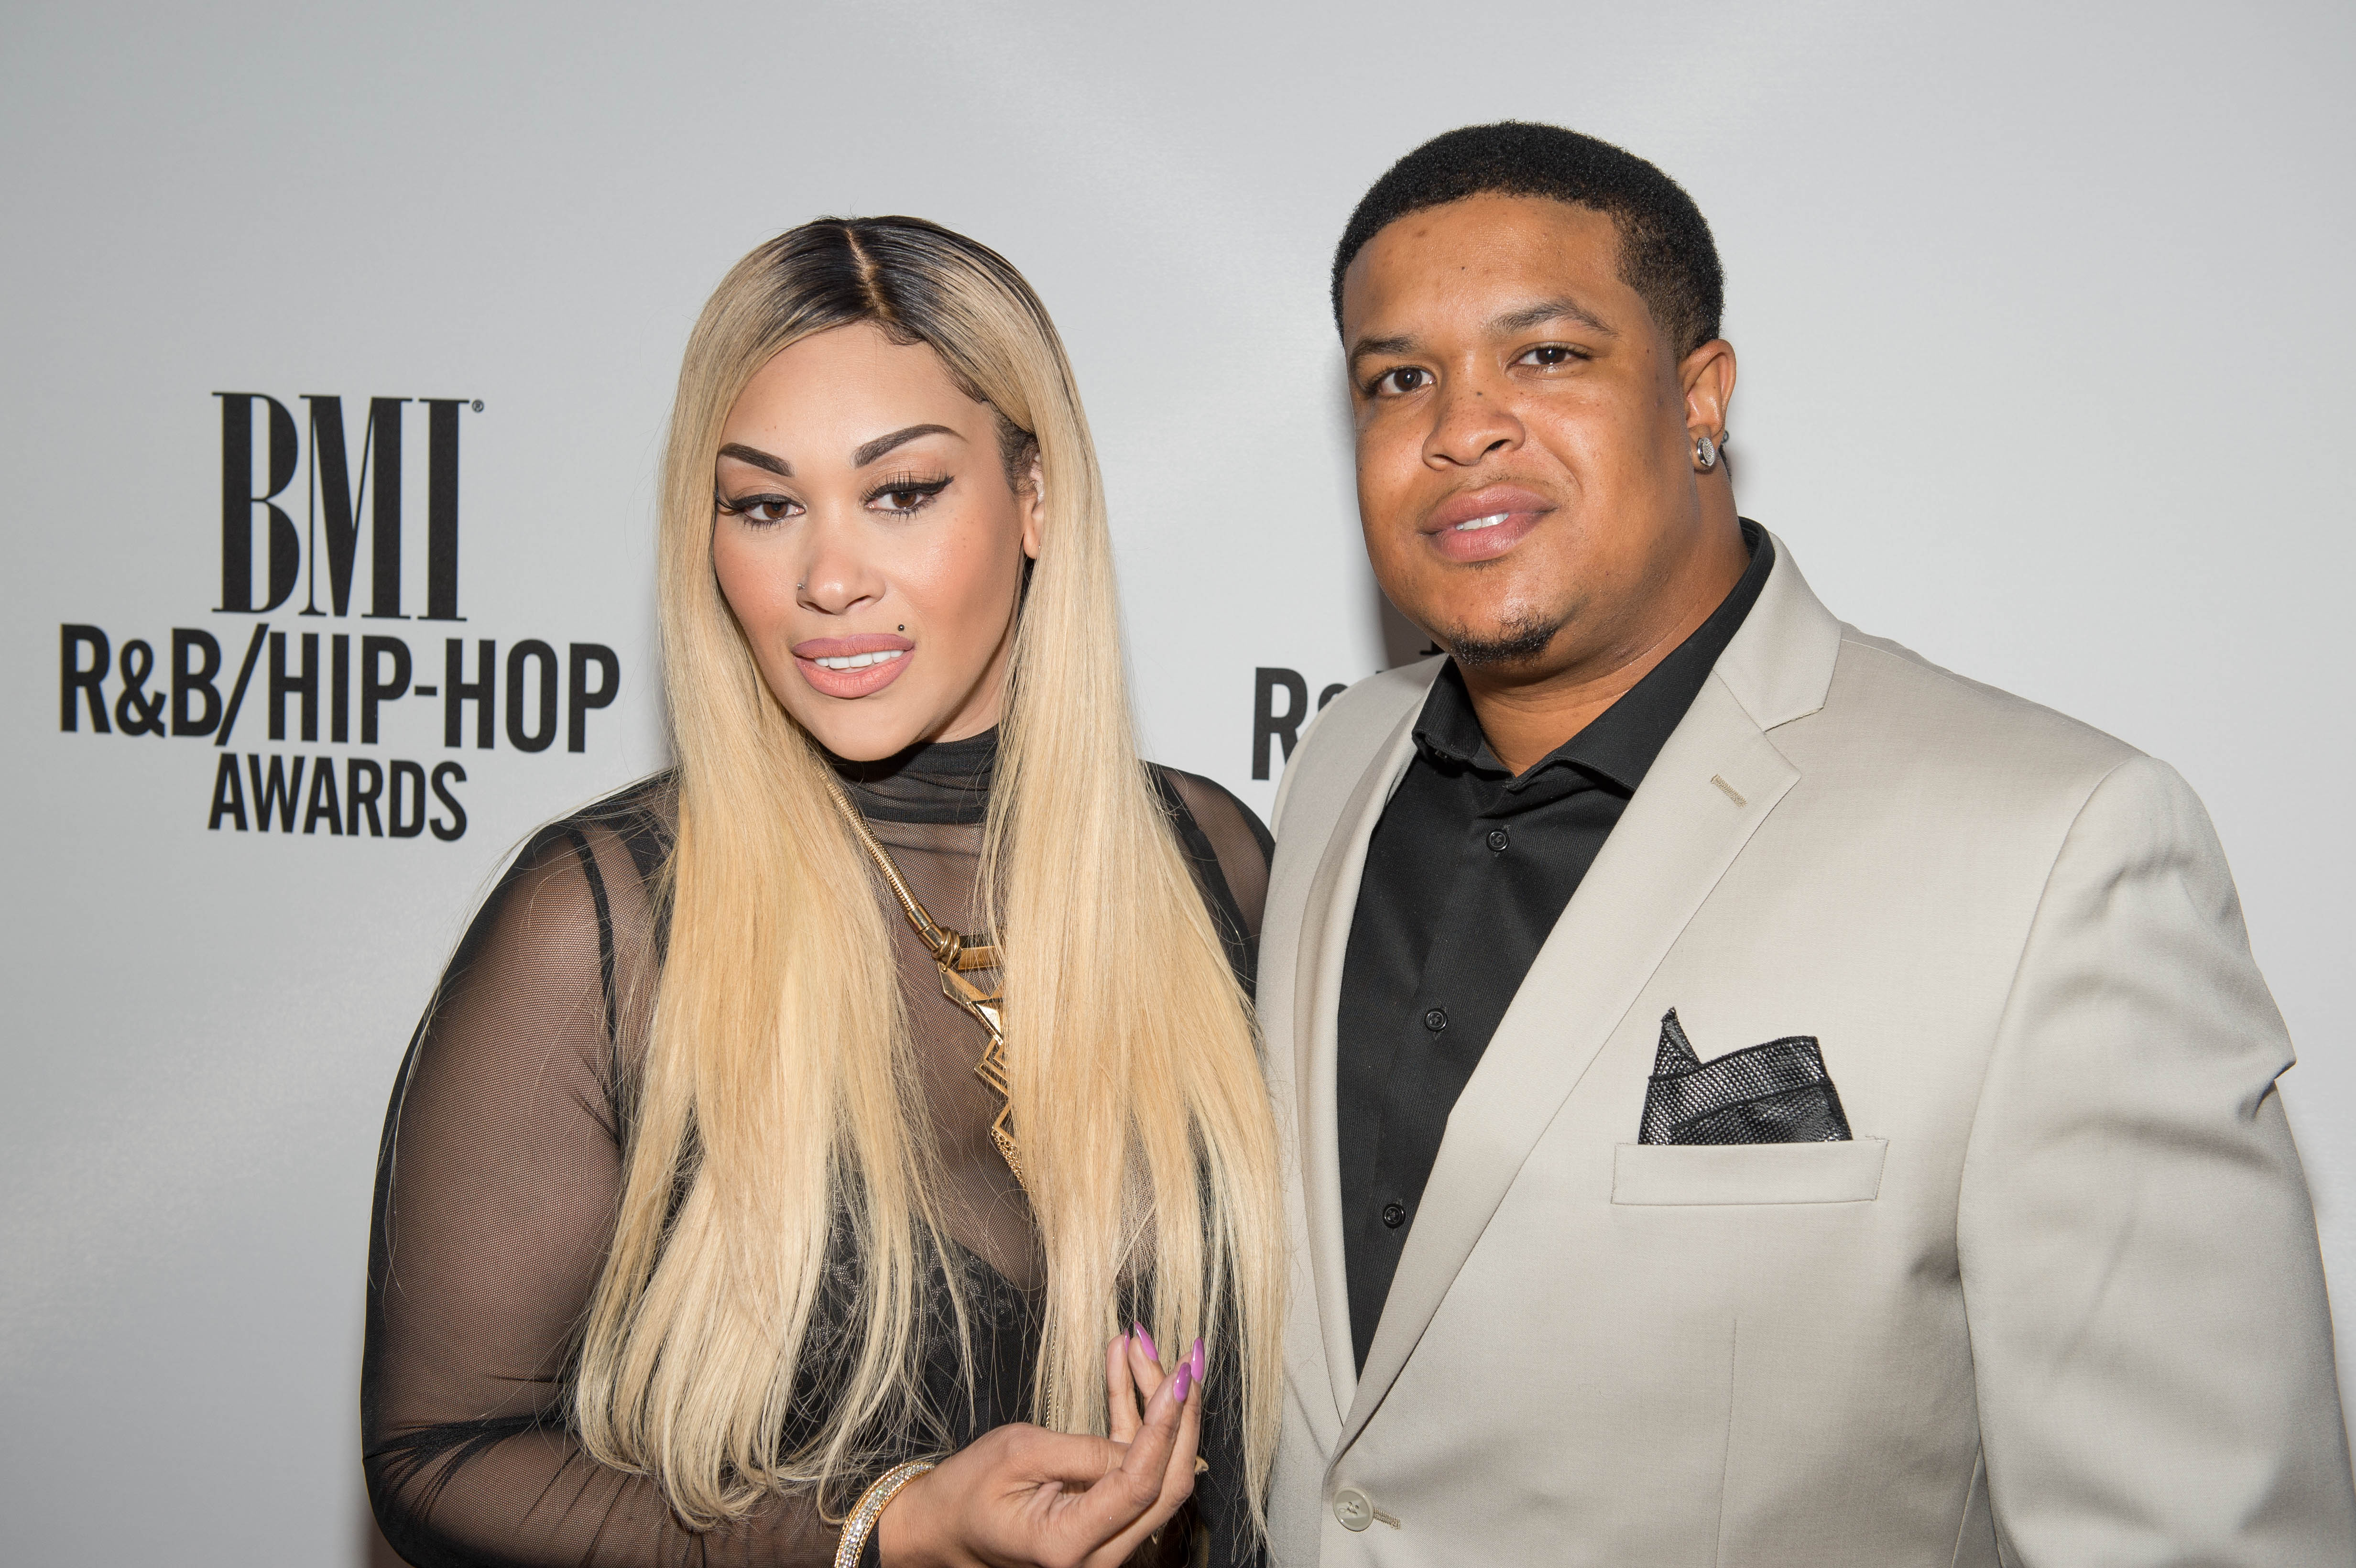 Michael Ford Opens Up About Wanting A Divorce From KeKe Wyatt